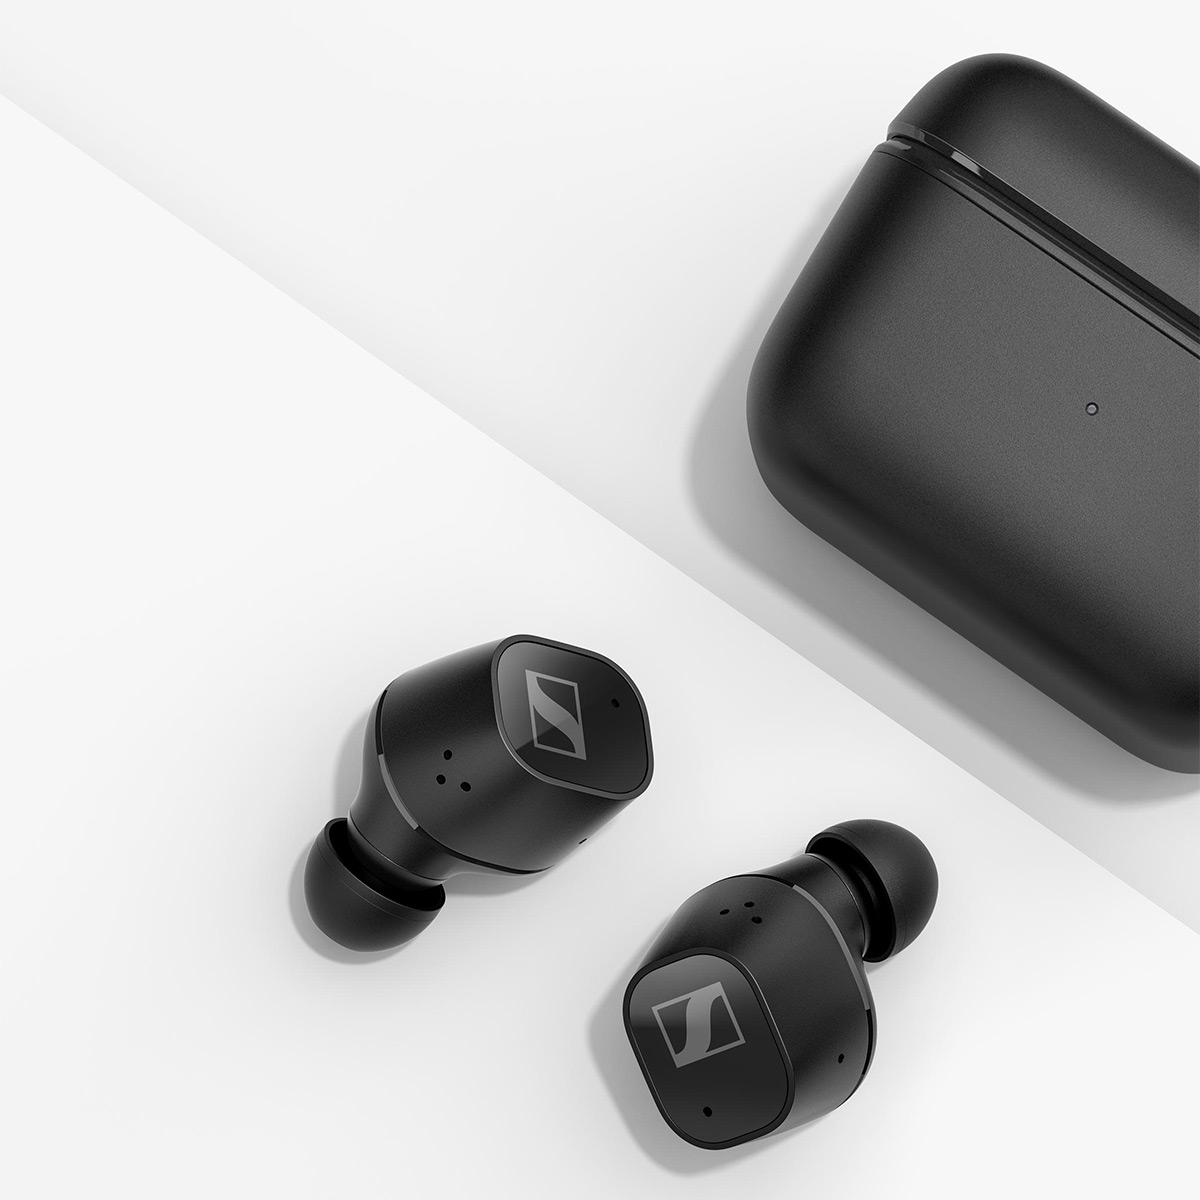 Sennheiser CX Plus True Wireless Earbuds with Active Noise Cancellation